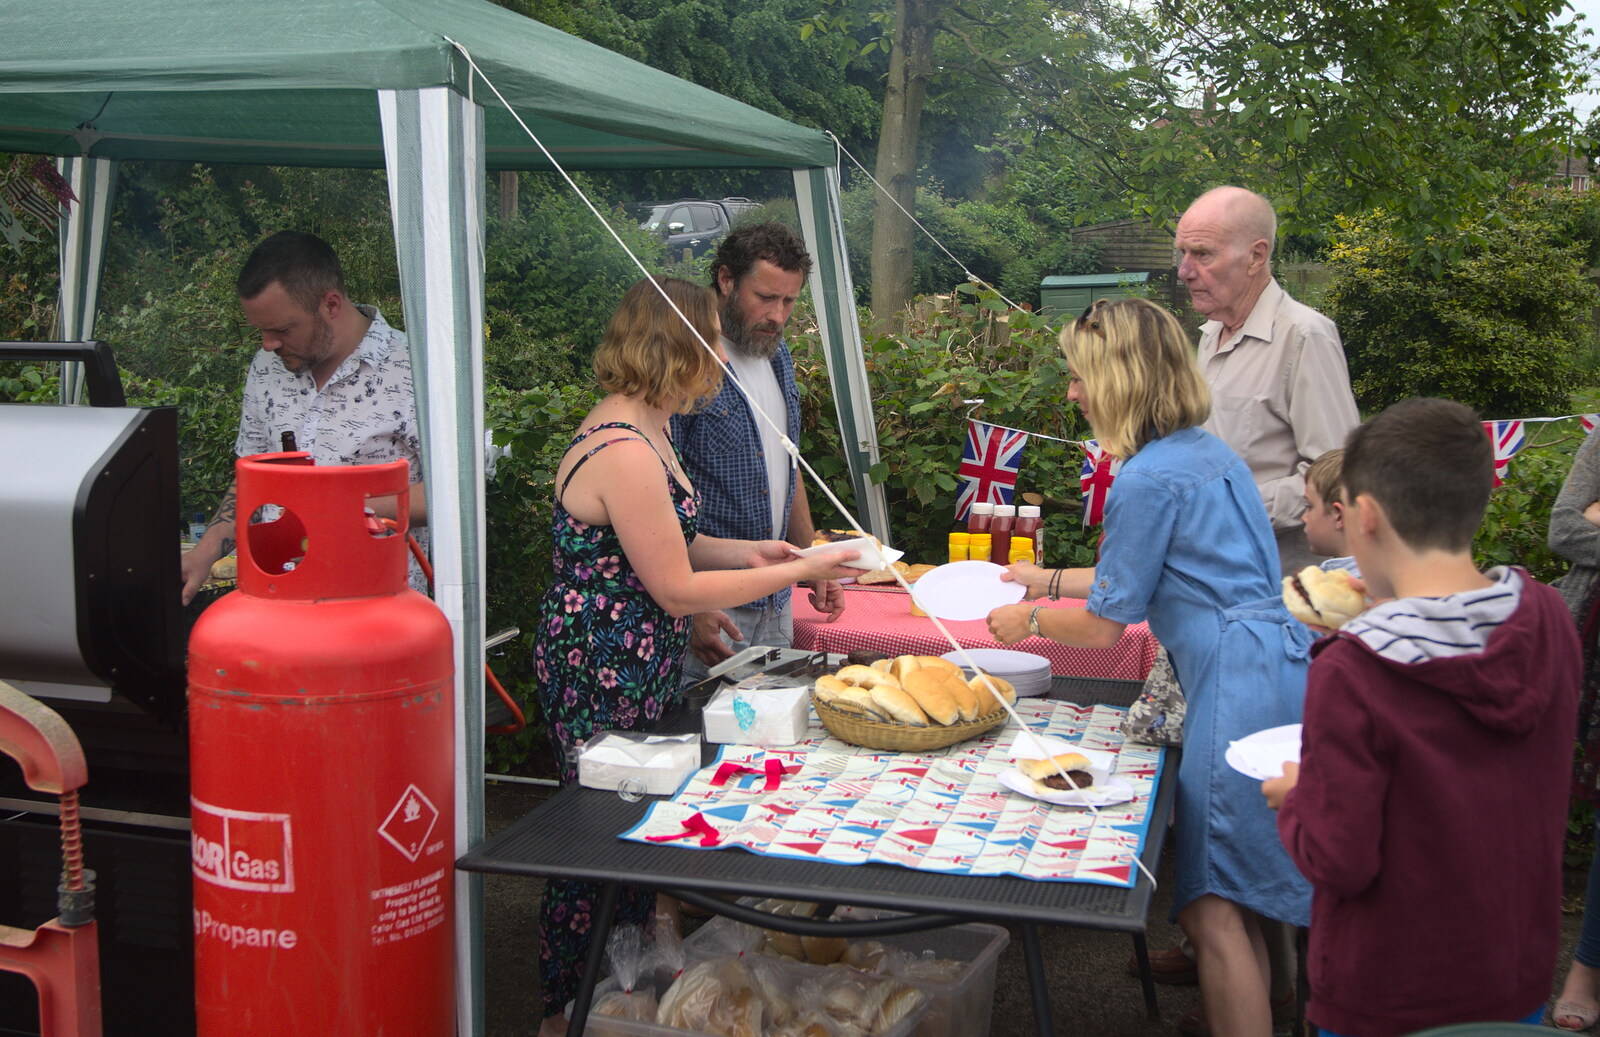 Grandad's queuing at the barbeque from The Queen's Village Hall Birthday, Brome, Suffolk - 12th June 2016